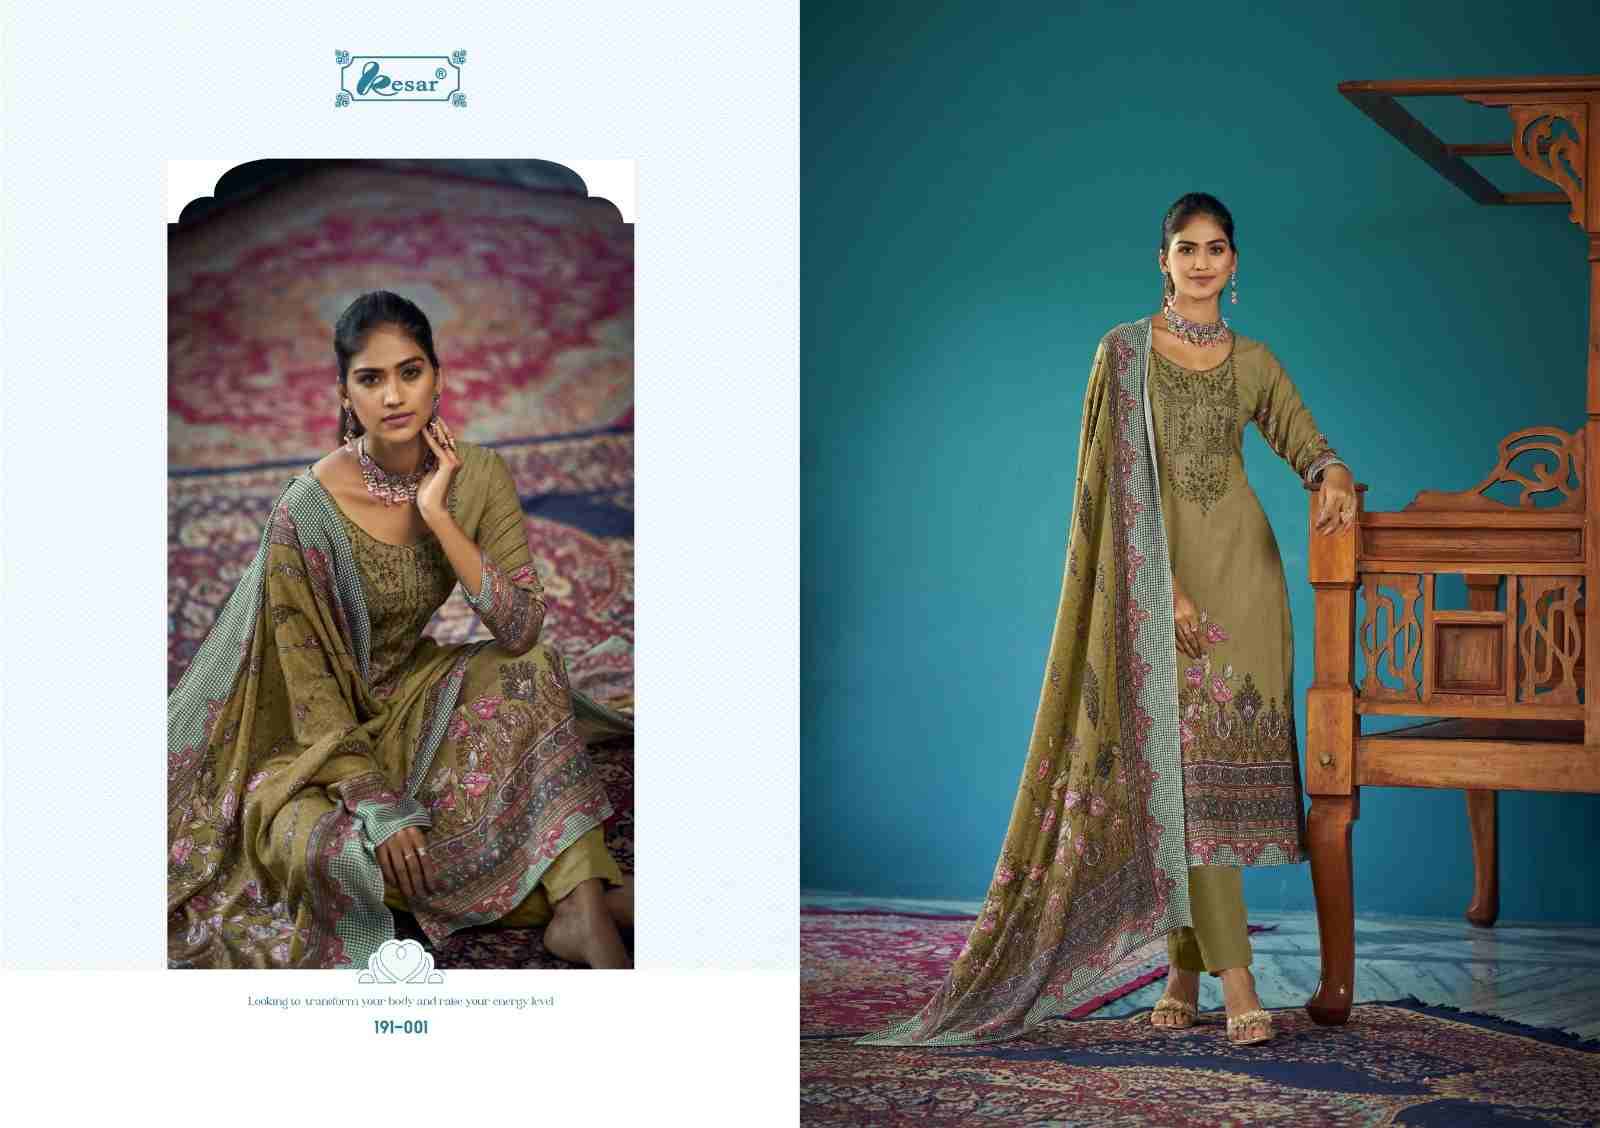 Amira By Kesar 191-001 To 191-006 Series Beautiful Festive Suits Colorful Stylish Fancy Casual Wear & Ethnic Wear Whoolan Dresses At Wholesale Price